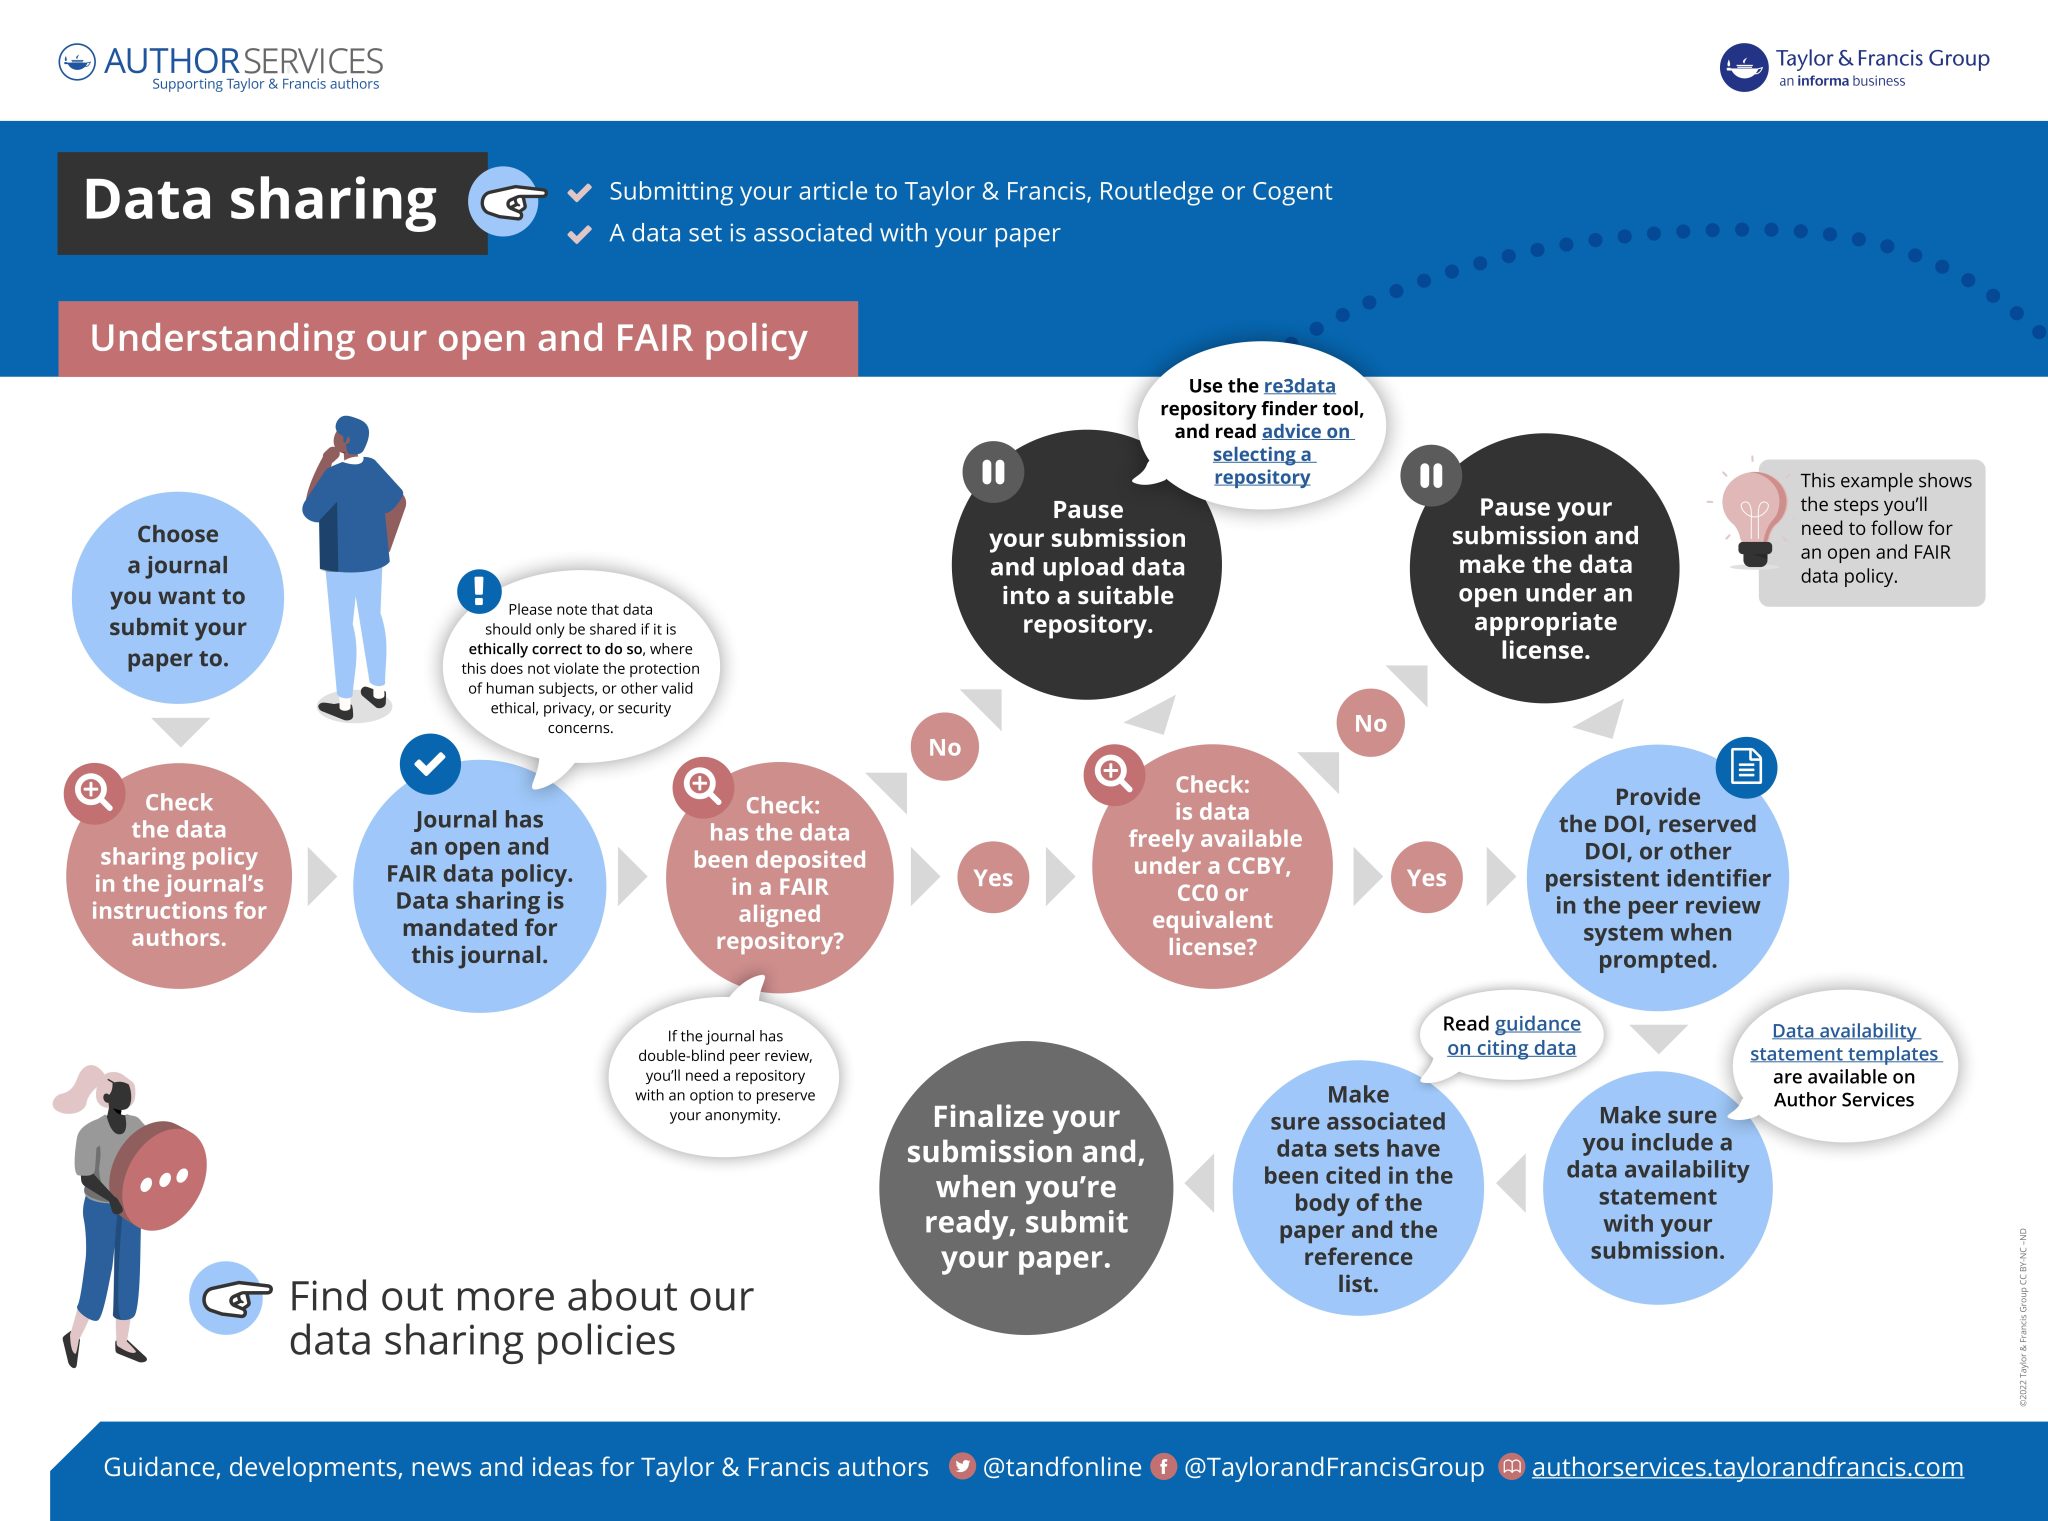 Infographic with information about our open and fair data policy.